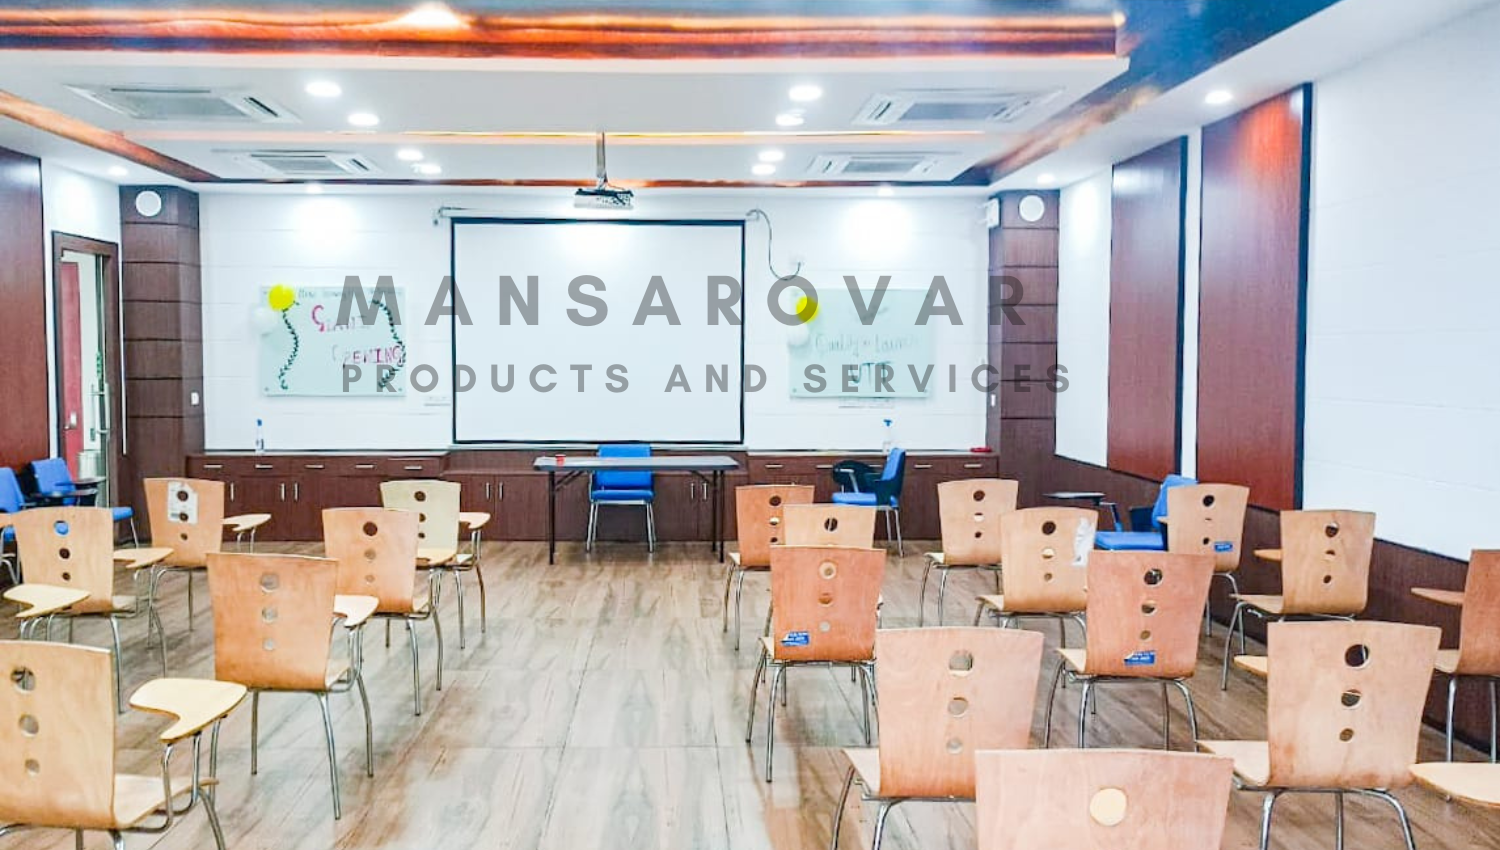 MANUFACTURER OF PRE-FABRICATED BUILDINGS IN PUNJAB | Mansarovar Products & Services | prefab buildings suppliers in Ludhiana, prefab buildings suppliers in Mohali, prefab buildings suppliers in Jalandhar, prefab buildings suppliers in Hoshiyarpur, prefab buildings suppliers in Amritsar - GL113458